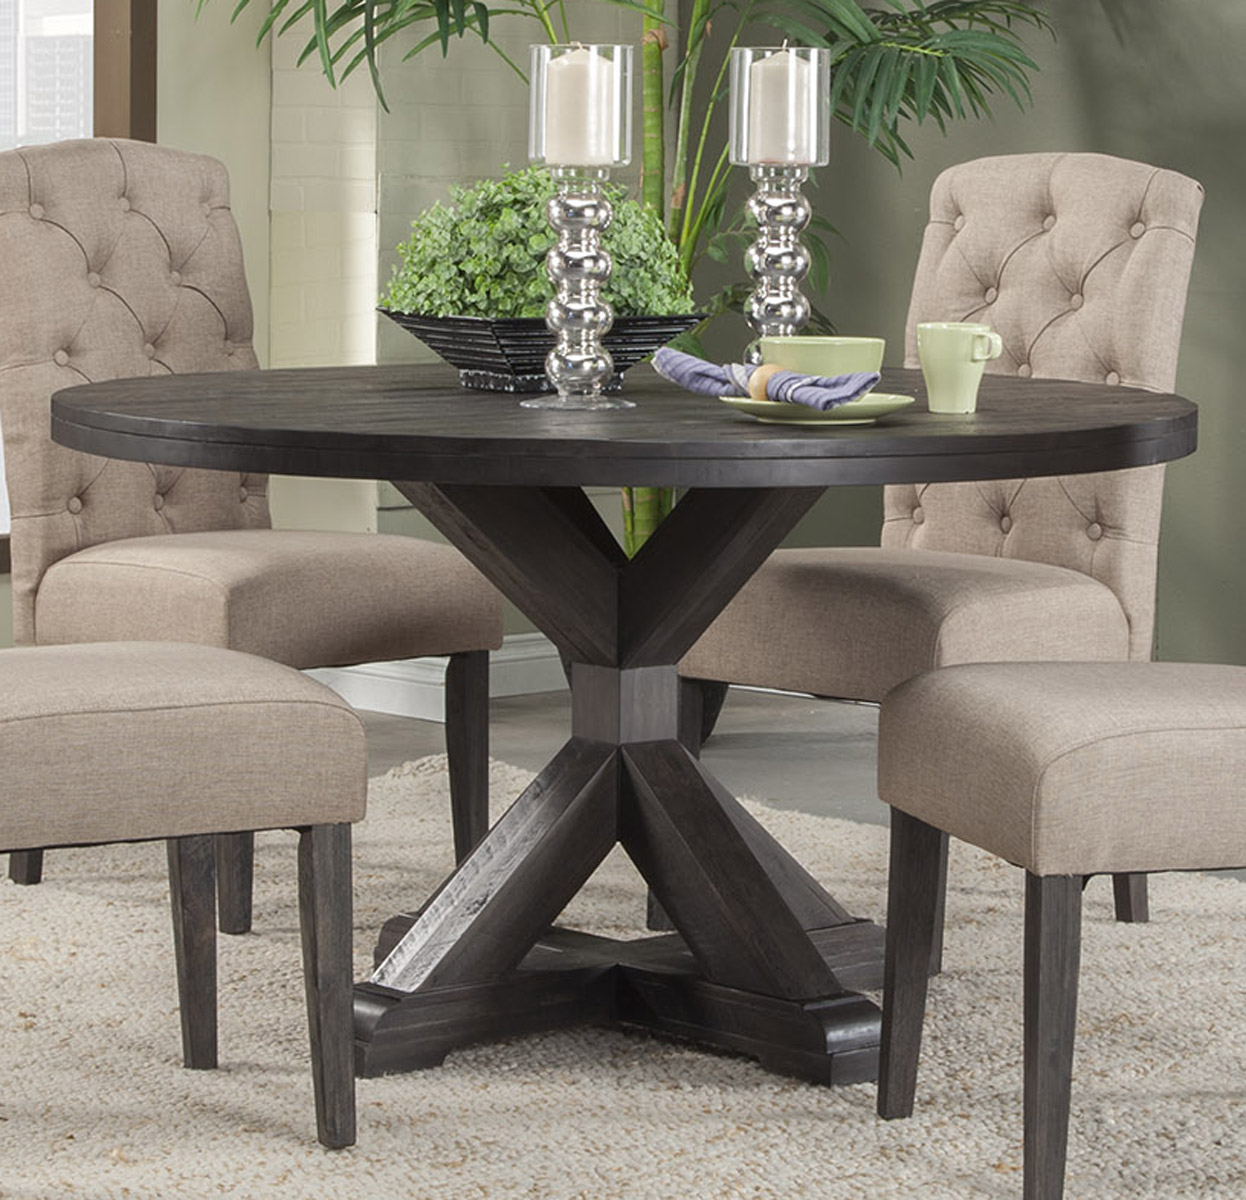 Home staged round table.